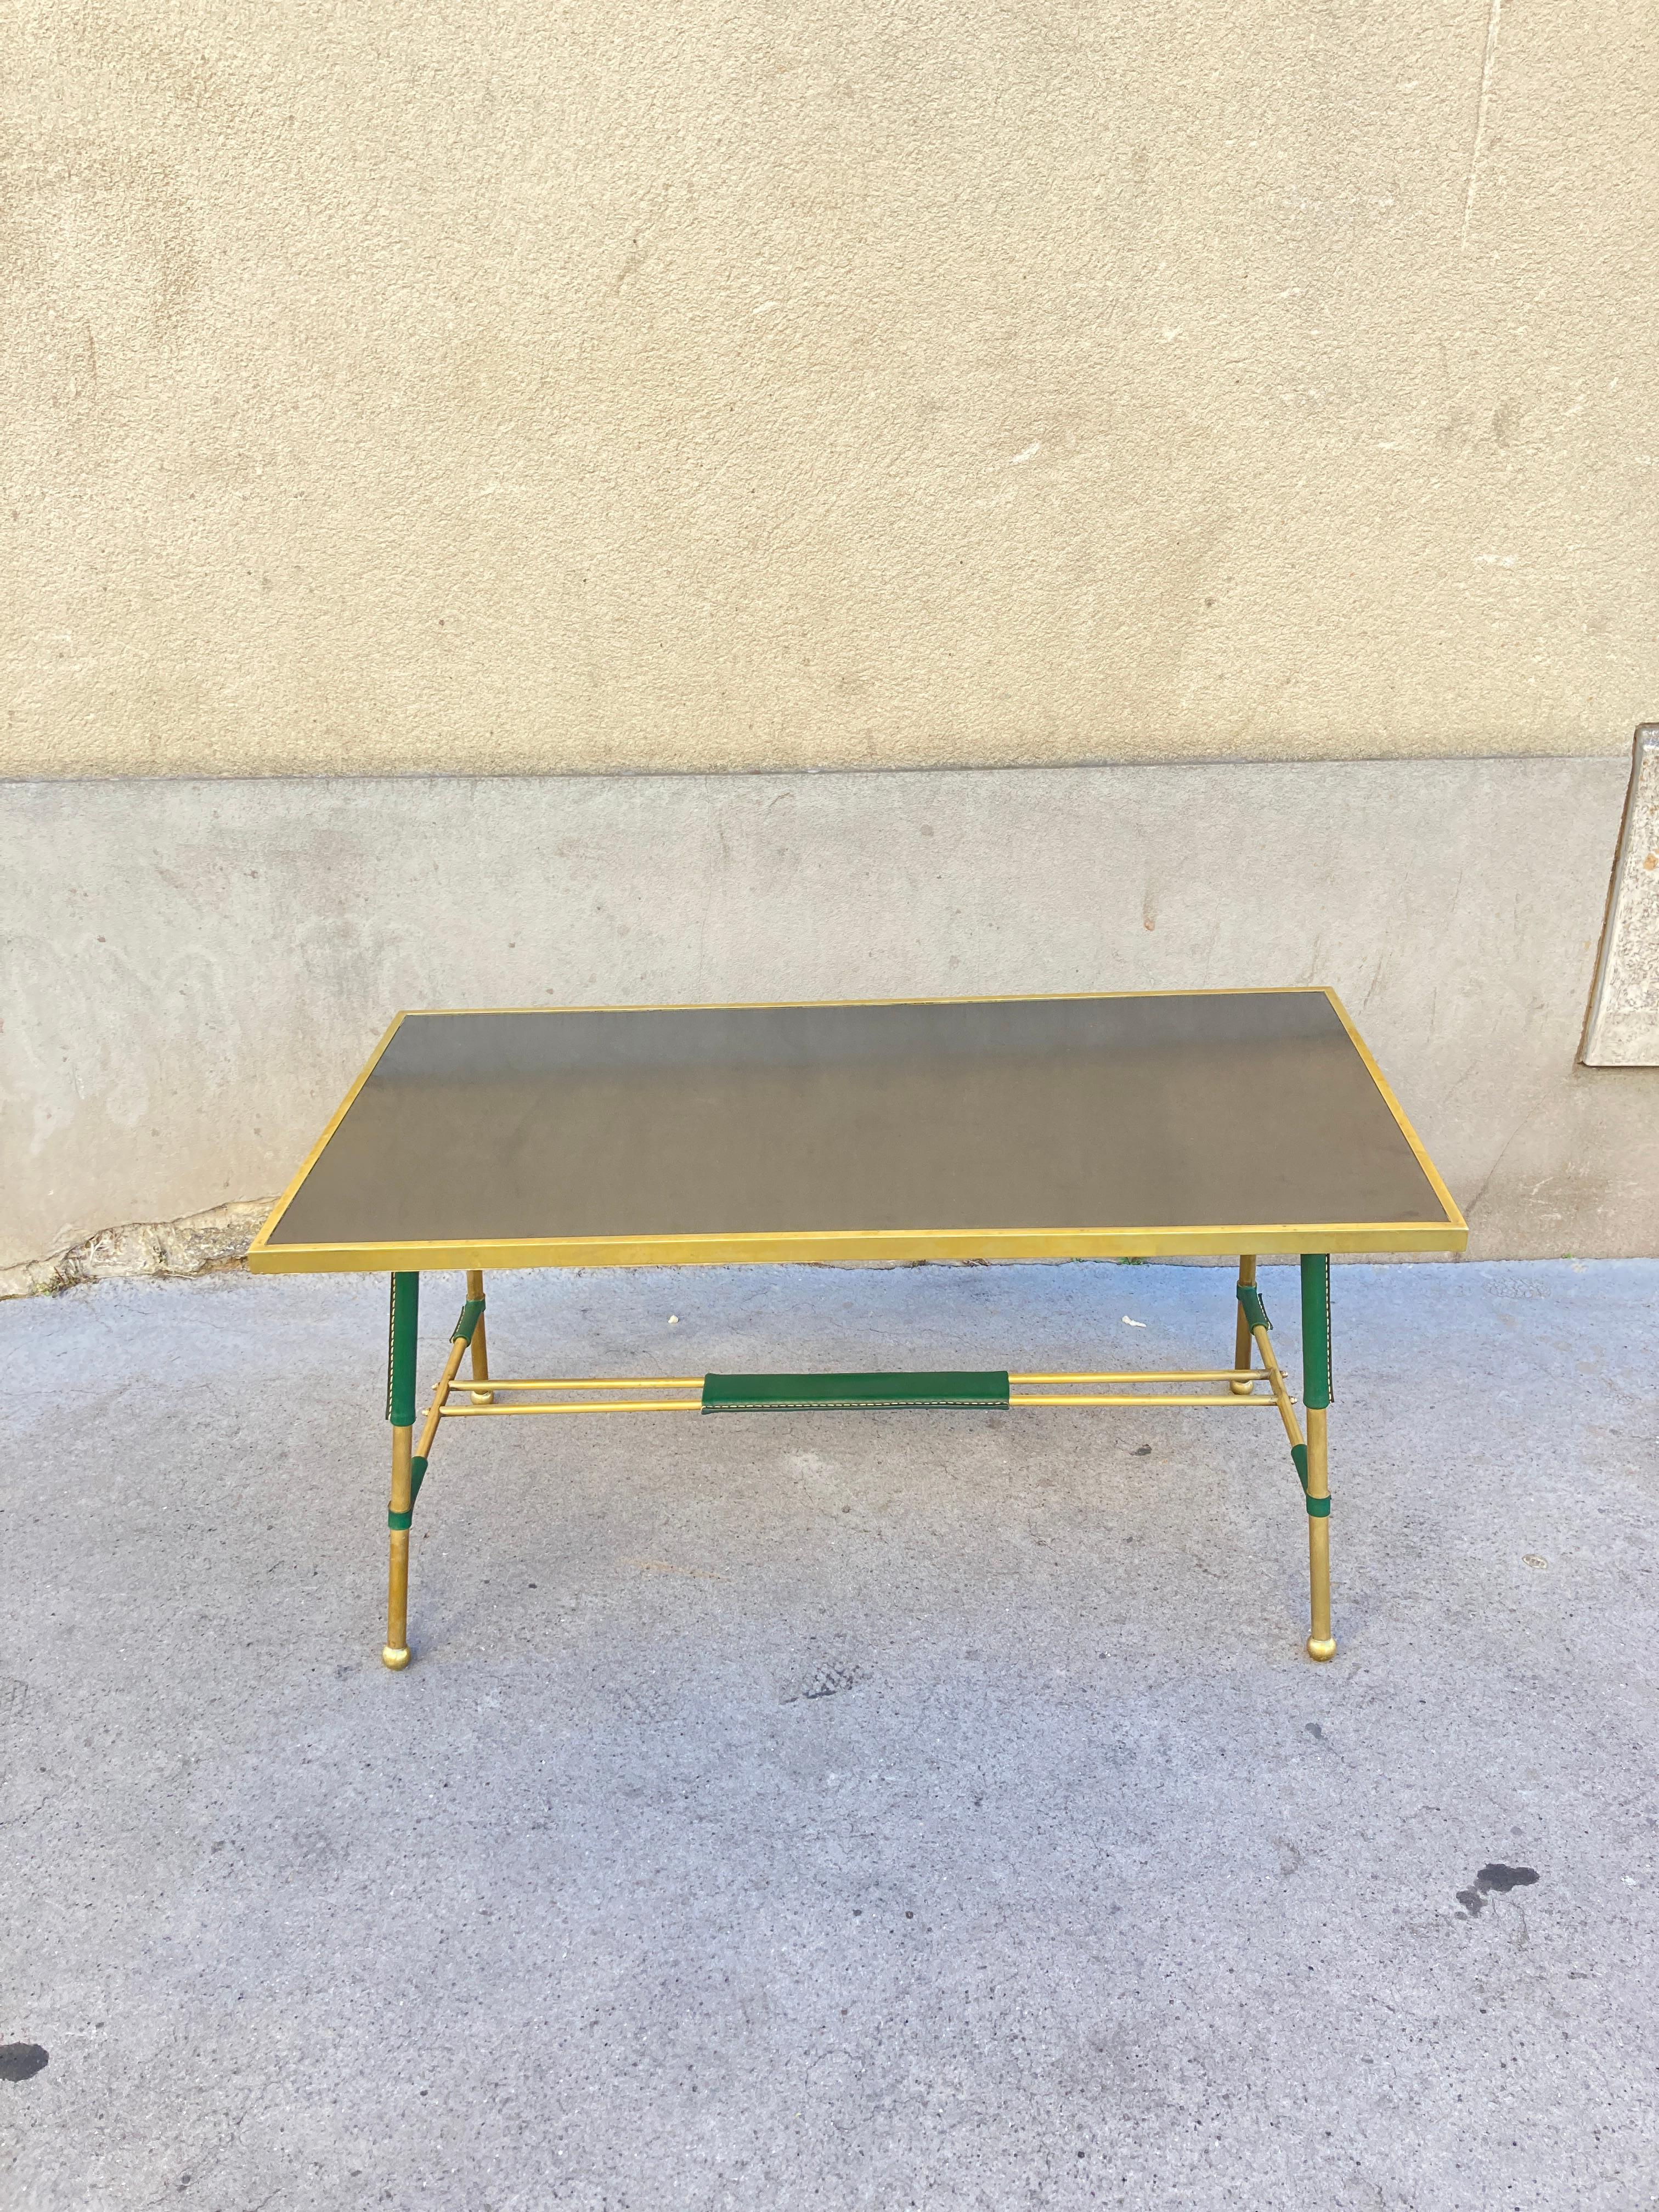 1950's Stitched leather, brass and formica cocktail table by Jacques Adnet
France
